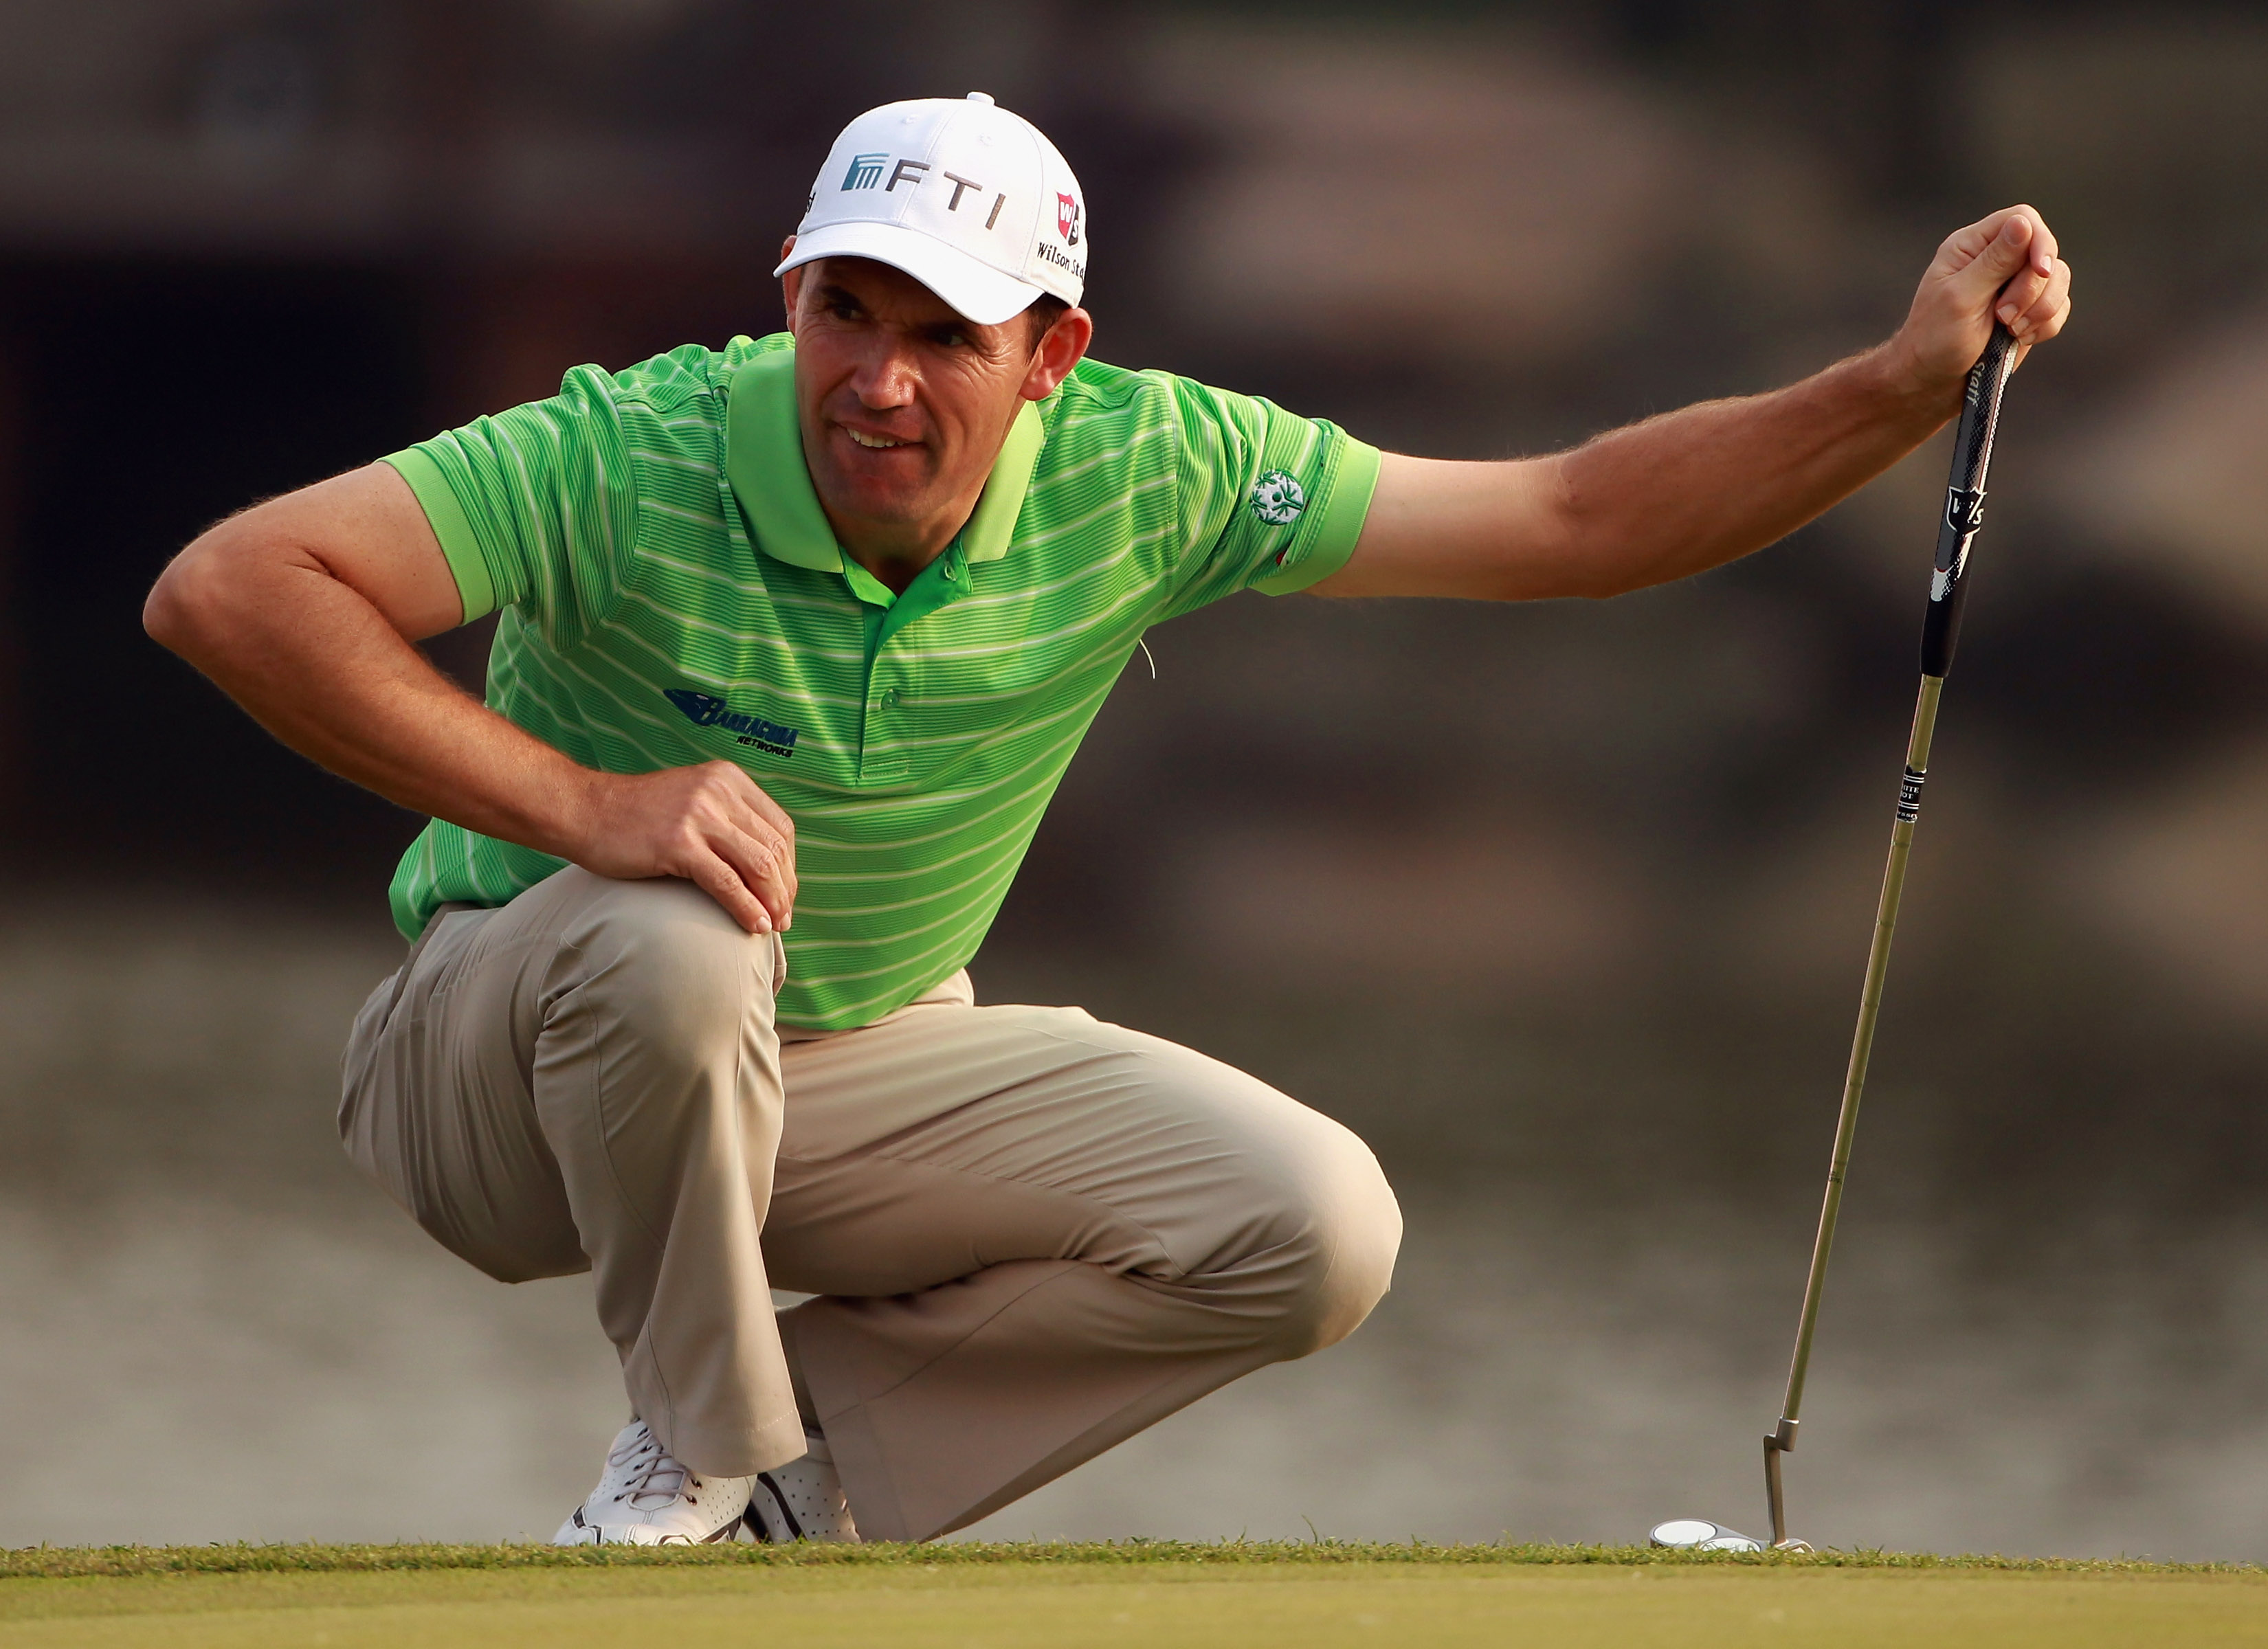 SHANGHAI, CHINA - NOVEMBER 06:  Padraig Harrington of Ireland lines up a putt on the 18th hole during the third round of the WGC-HSBC Champions at Sheshan International Golf Club on November 6, 2010 in Shanghai, China.  (Photo by Andrew Redington/Getty Im